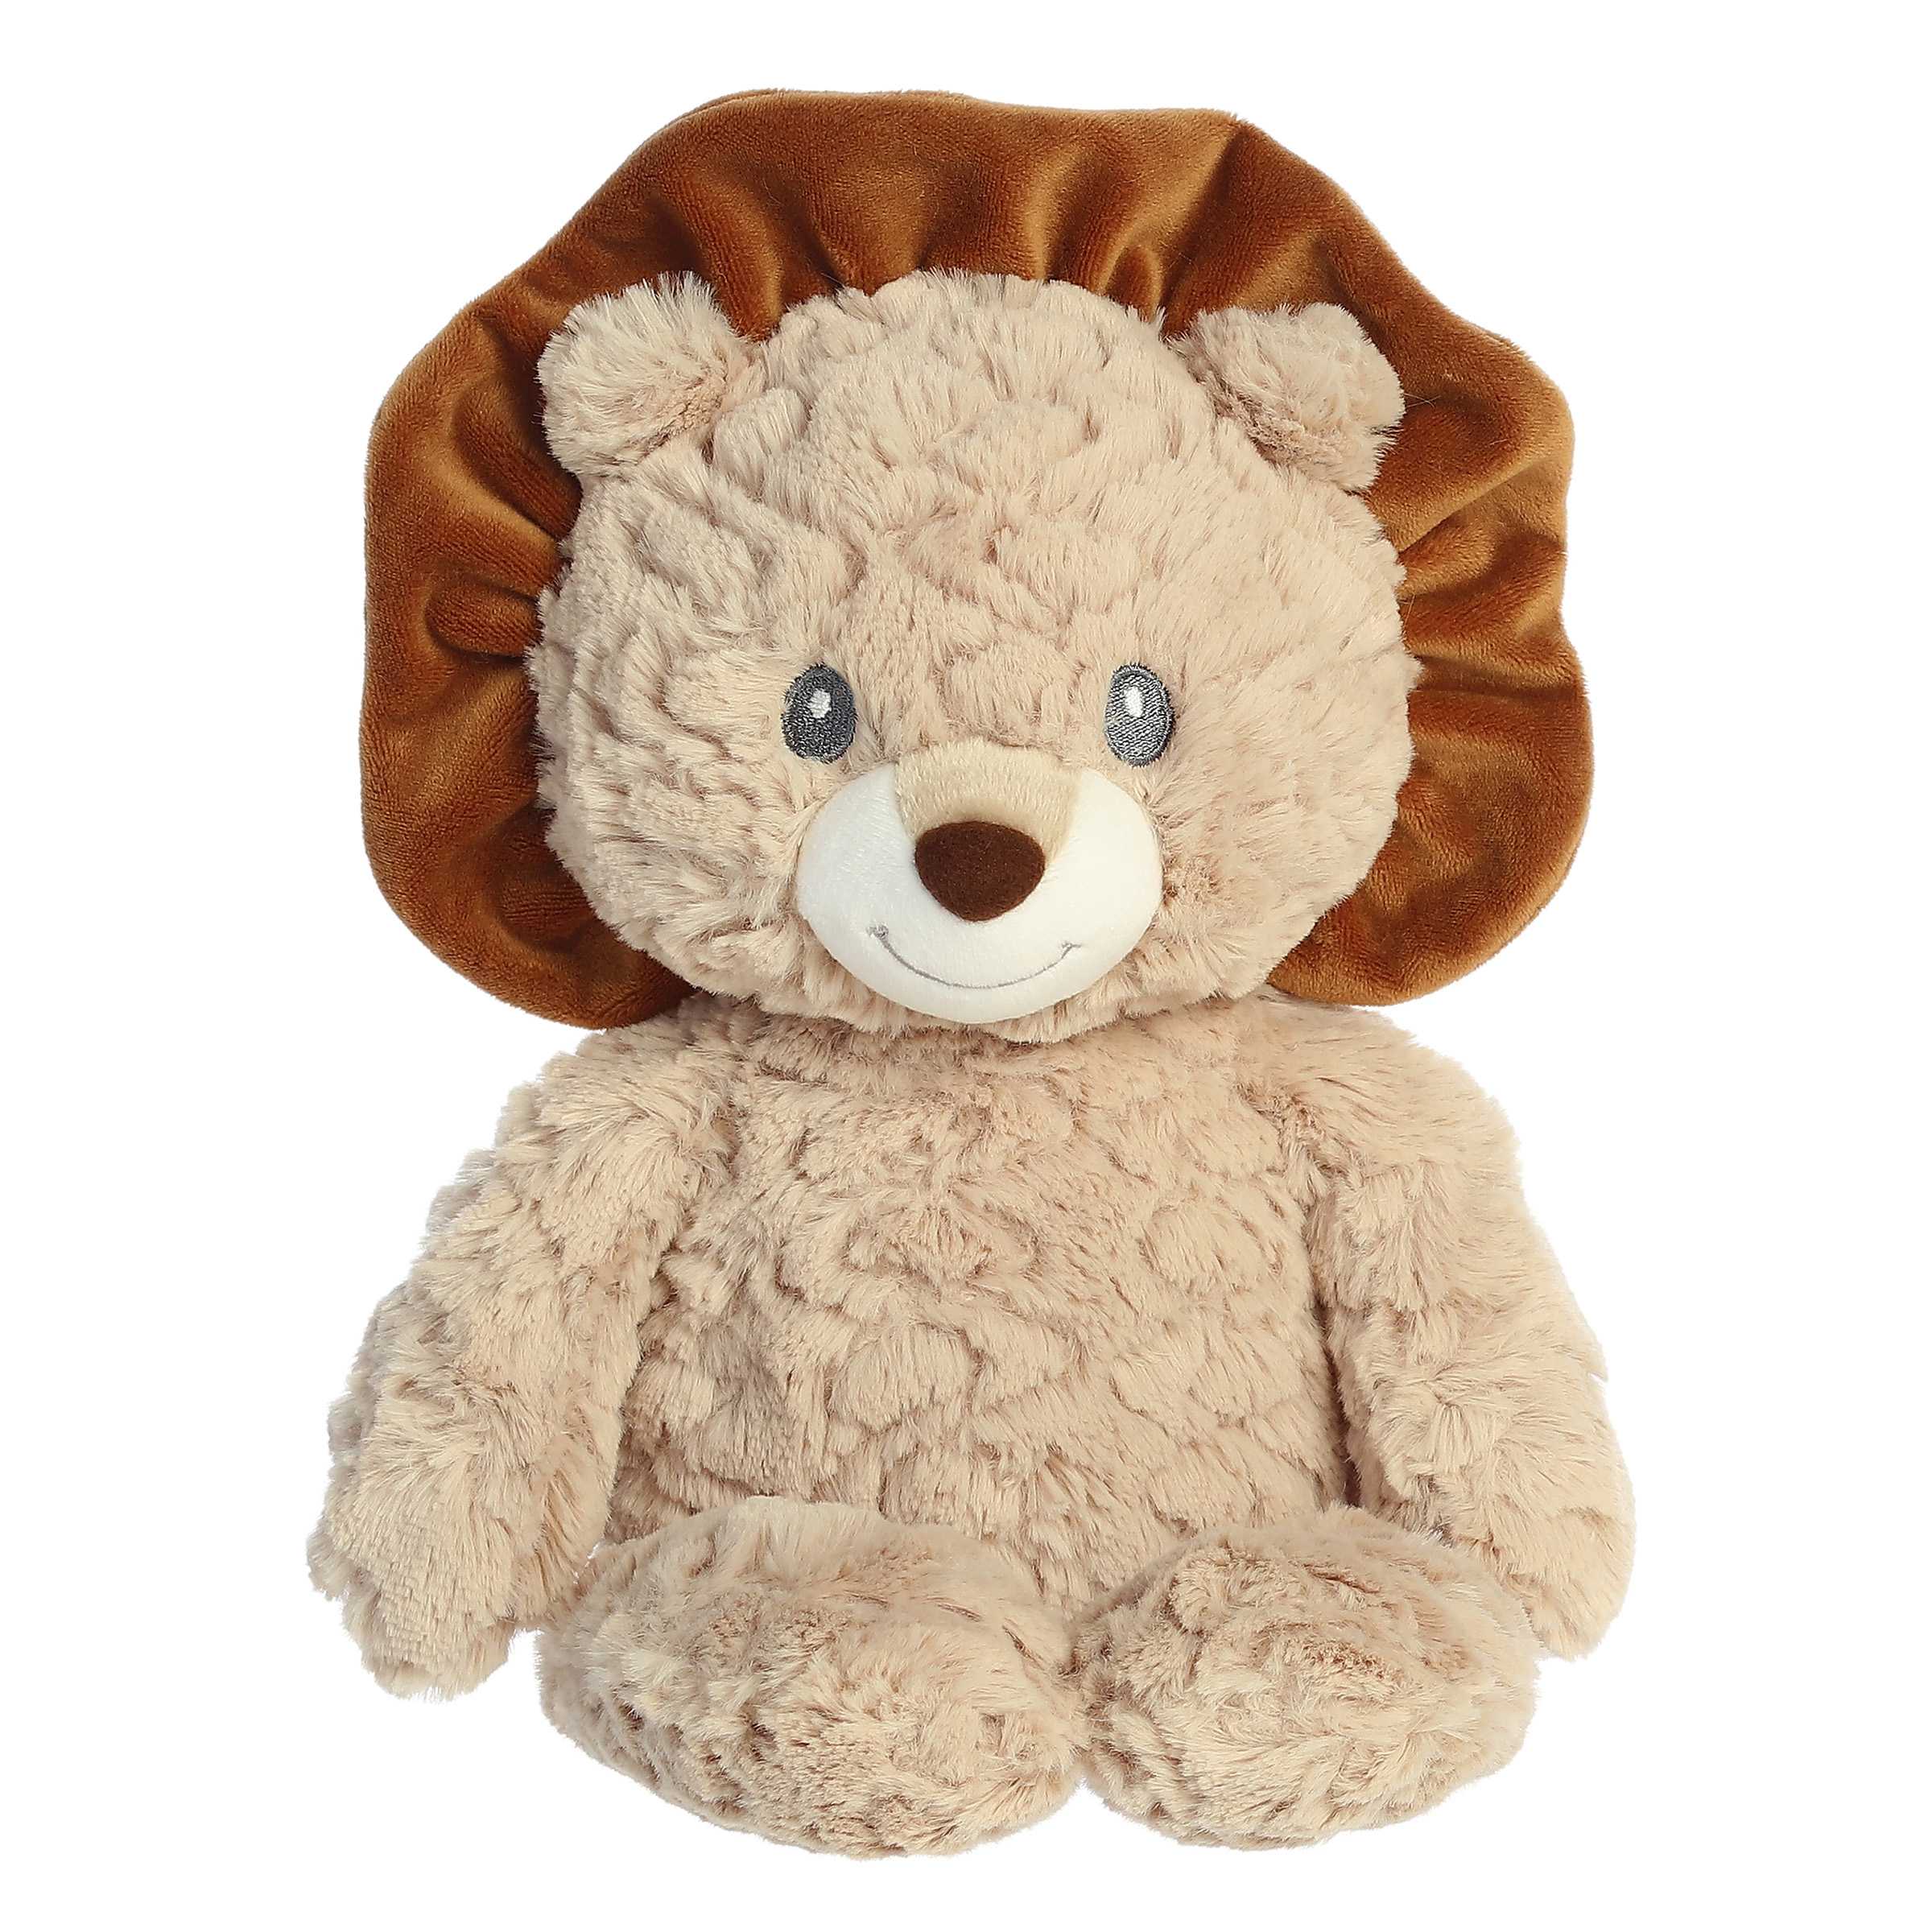 Sandy-bodied lion plush with a rich brown mane, crafted with baby-safe materials for huggable, by Aurora plush.